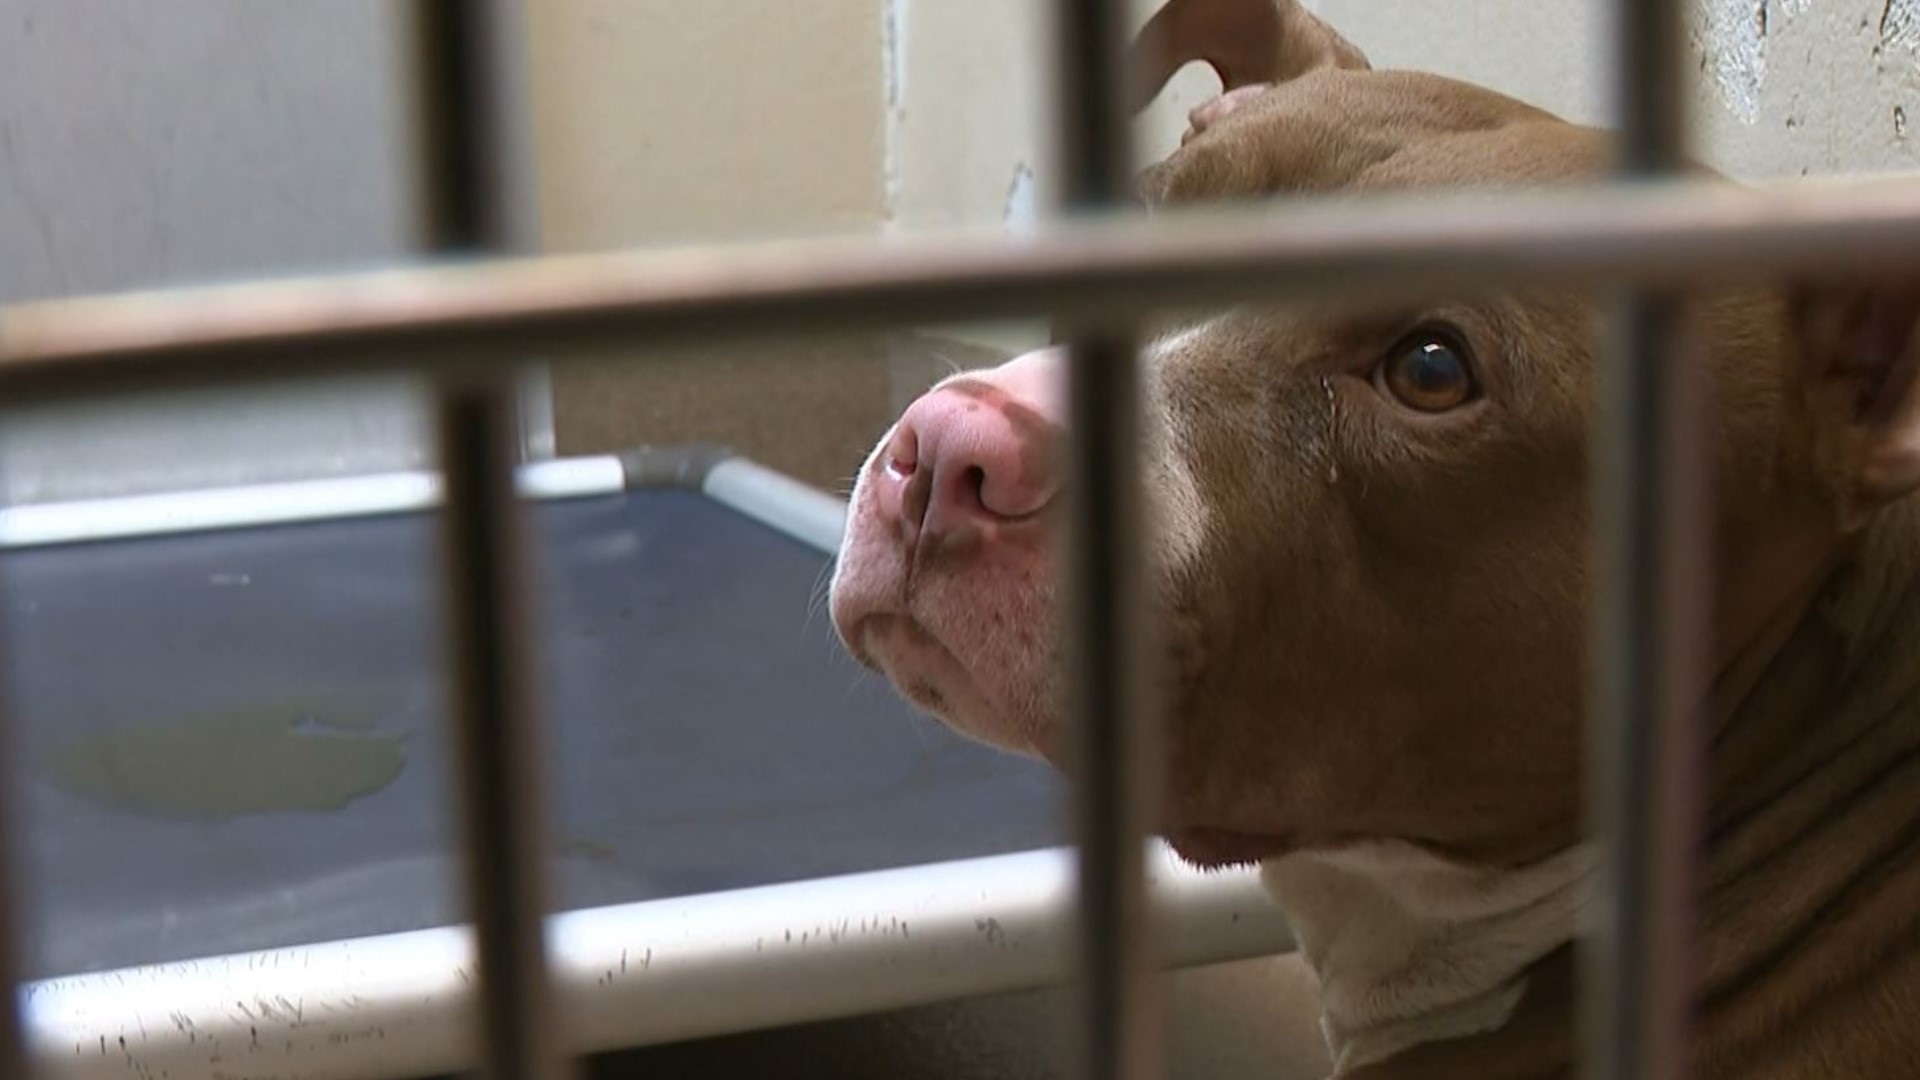 Dogs waiting for their owners' court dates are stuck in shelters, unable to find loving homes.